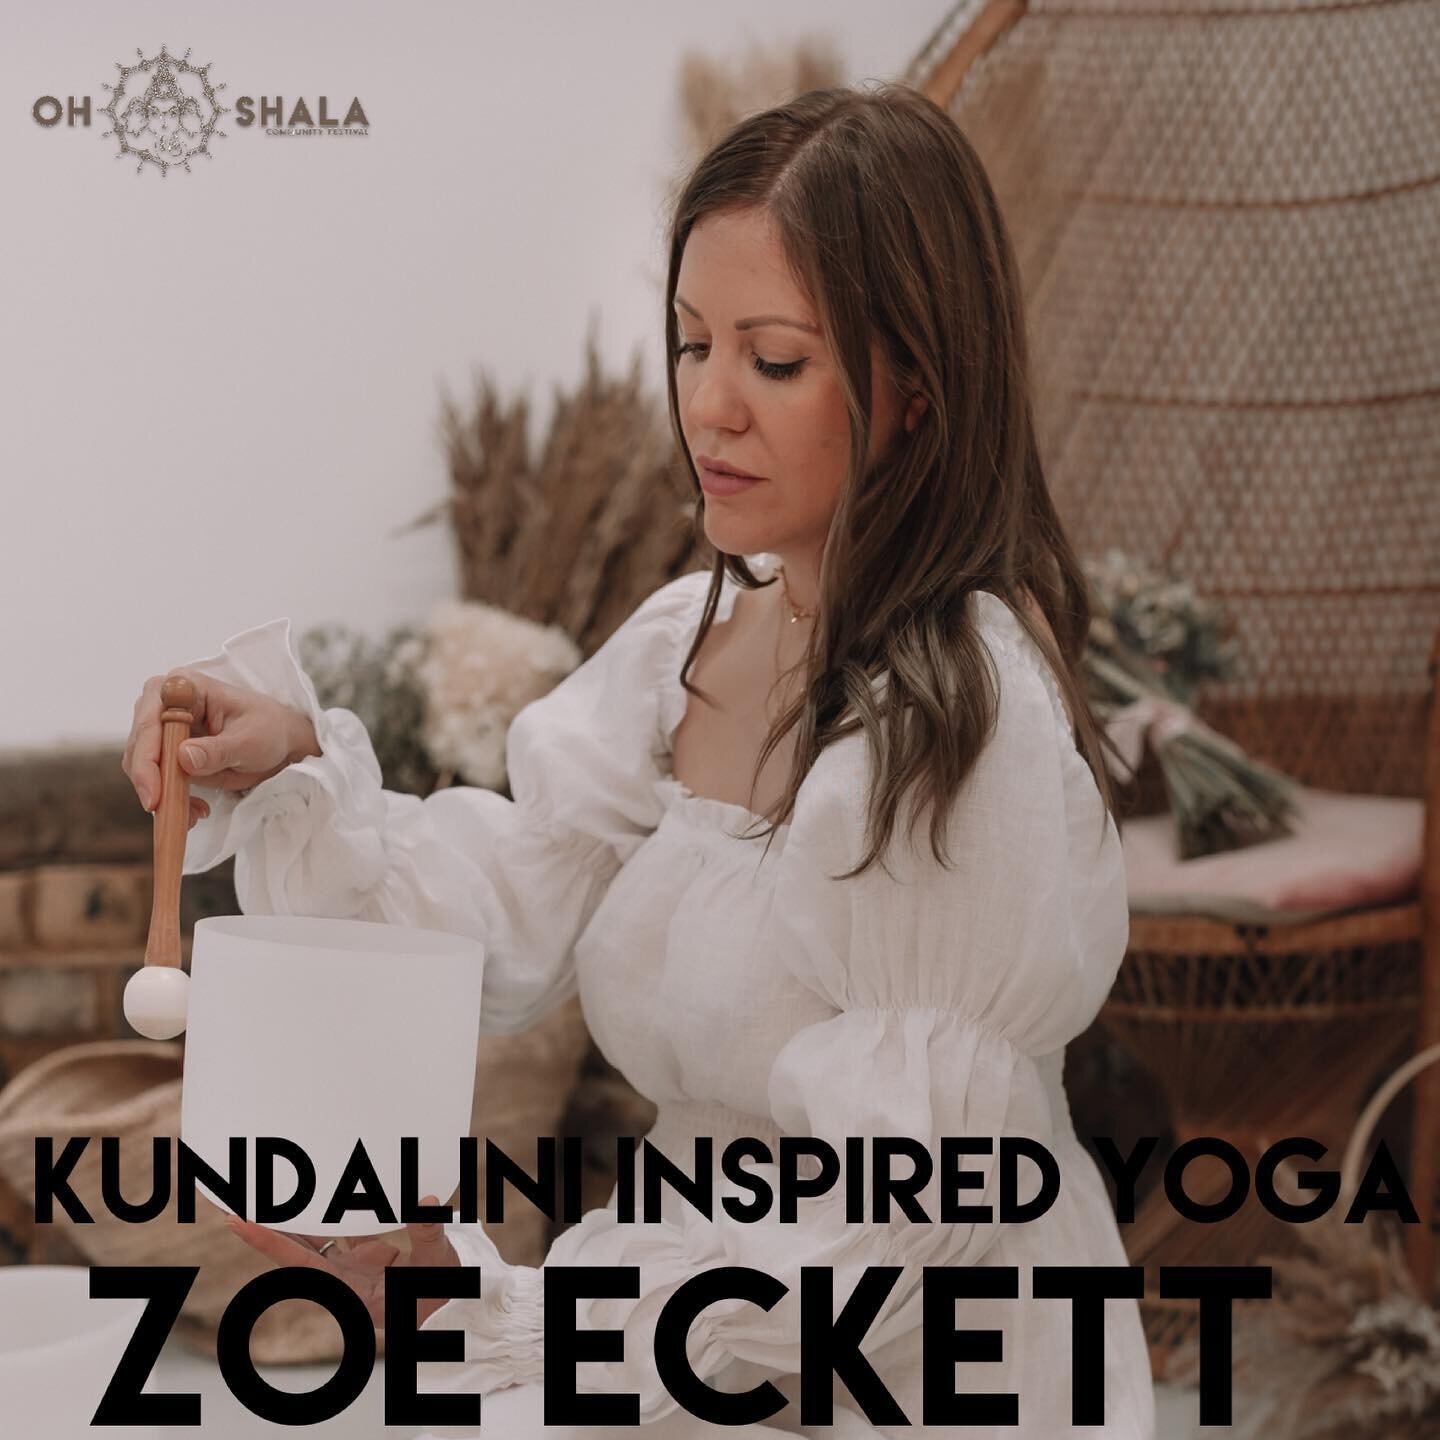 Join Zoe for a workshop of Self Love, Kundalini inspired with a special sound healing 💕 
.

Join Zoe for a kundalini yoga inspired self-love practice. Zoe will open the space, followed by breath-work, kriya and meditation.
Kundalini yoga is a powerf